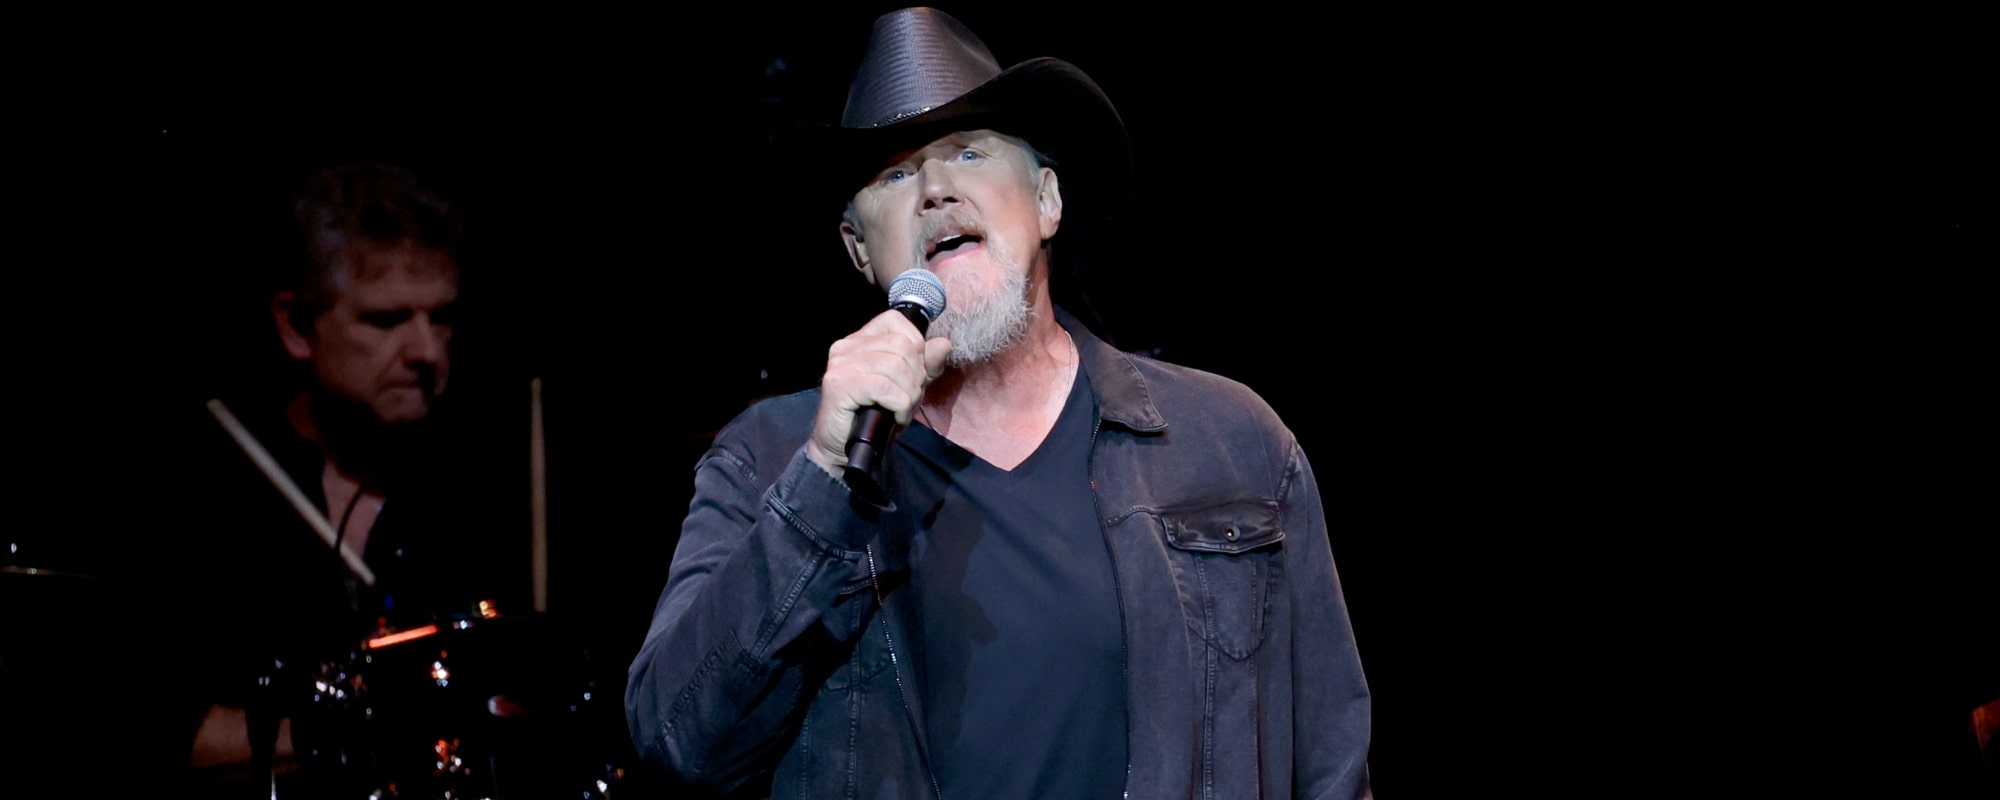 Watch: Trace Adkins Performs a Gorgeous Rendition of “White Christmas” During ‘Christmas at the Opry’